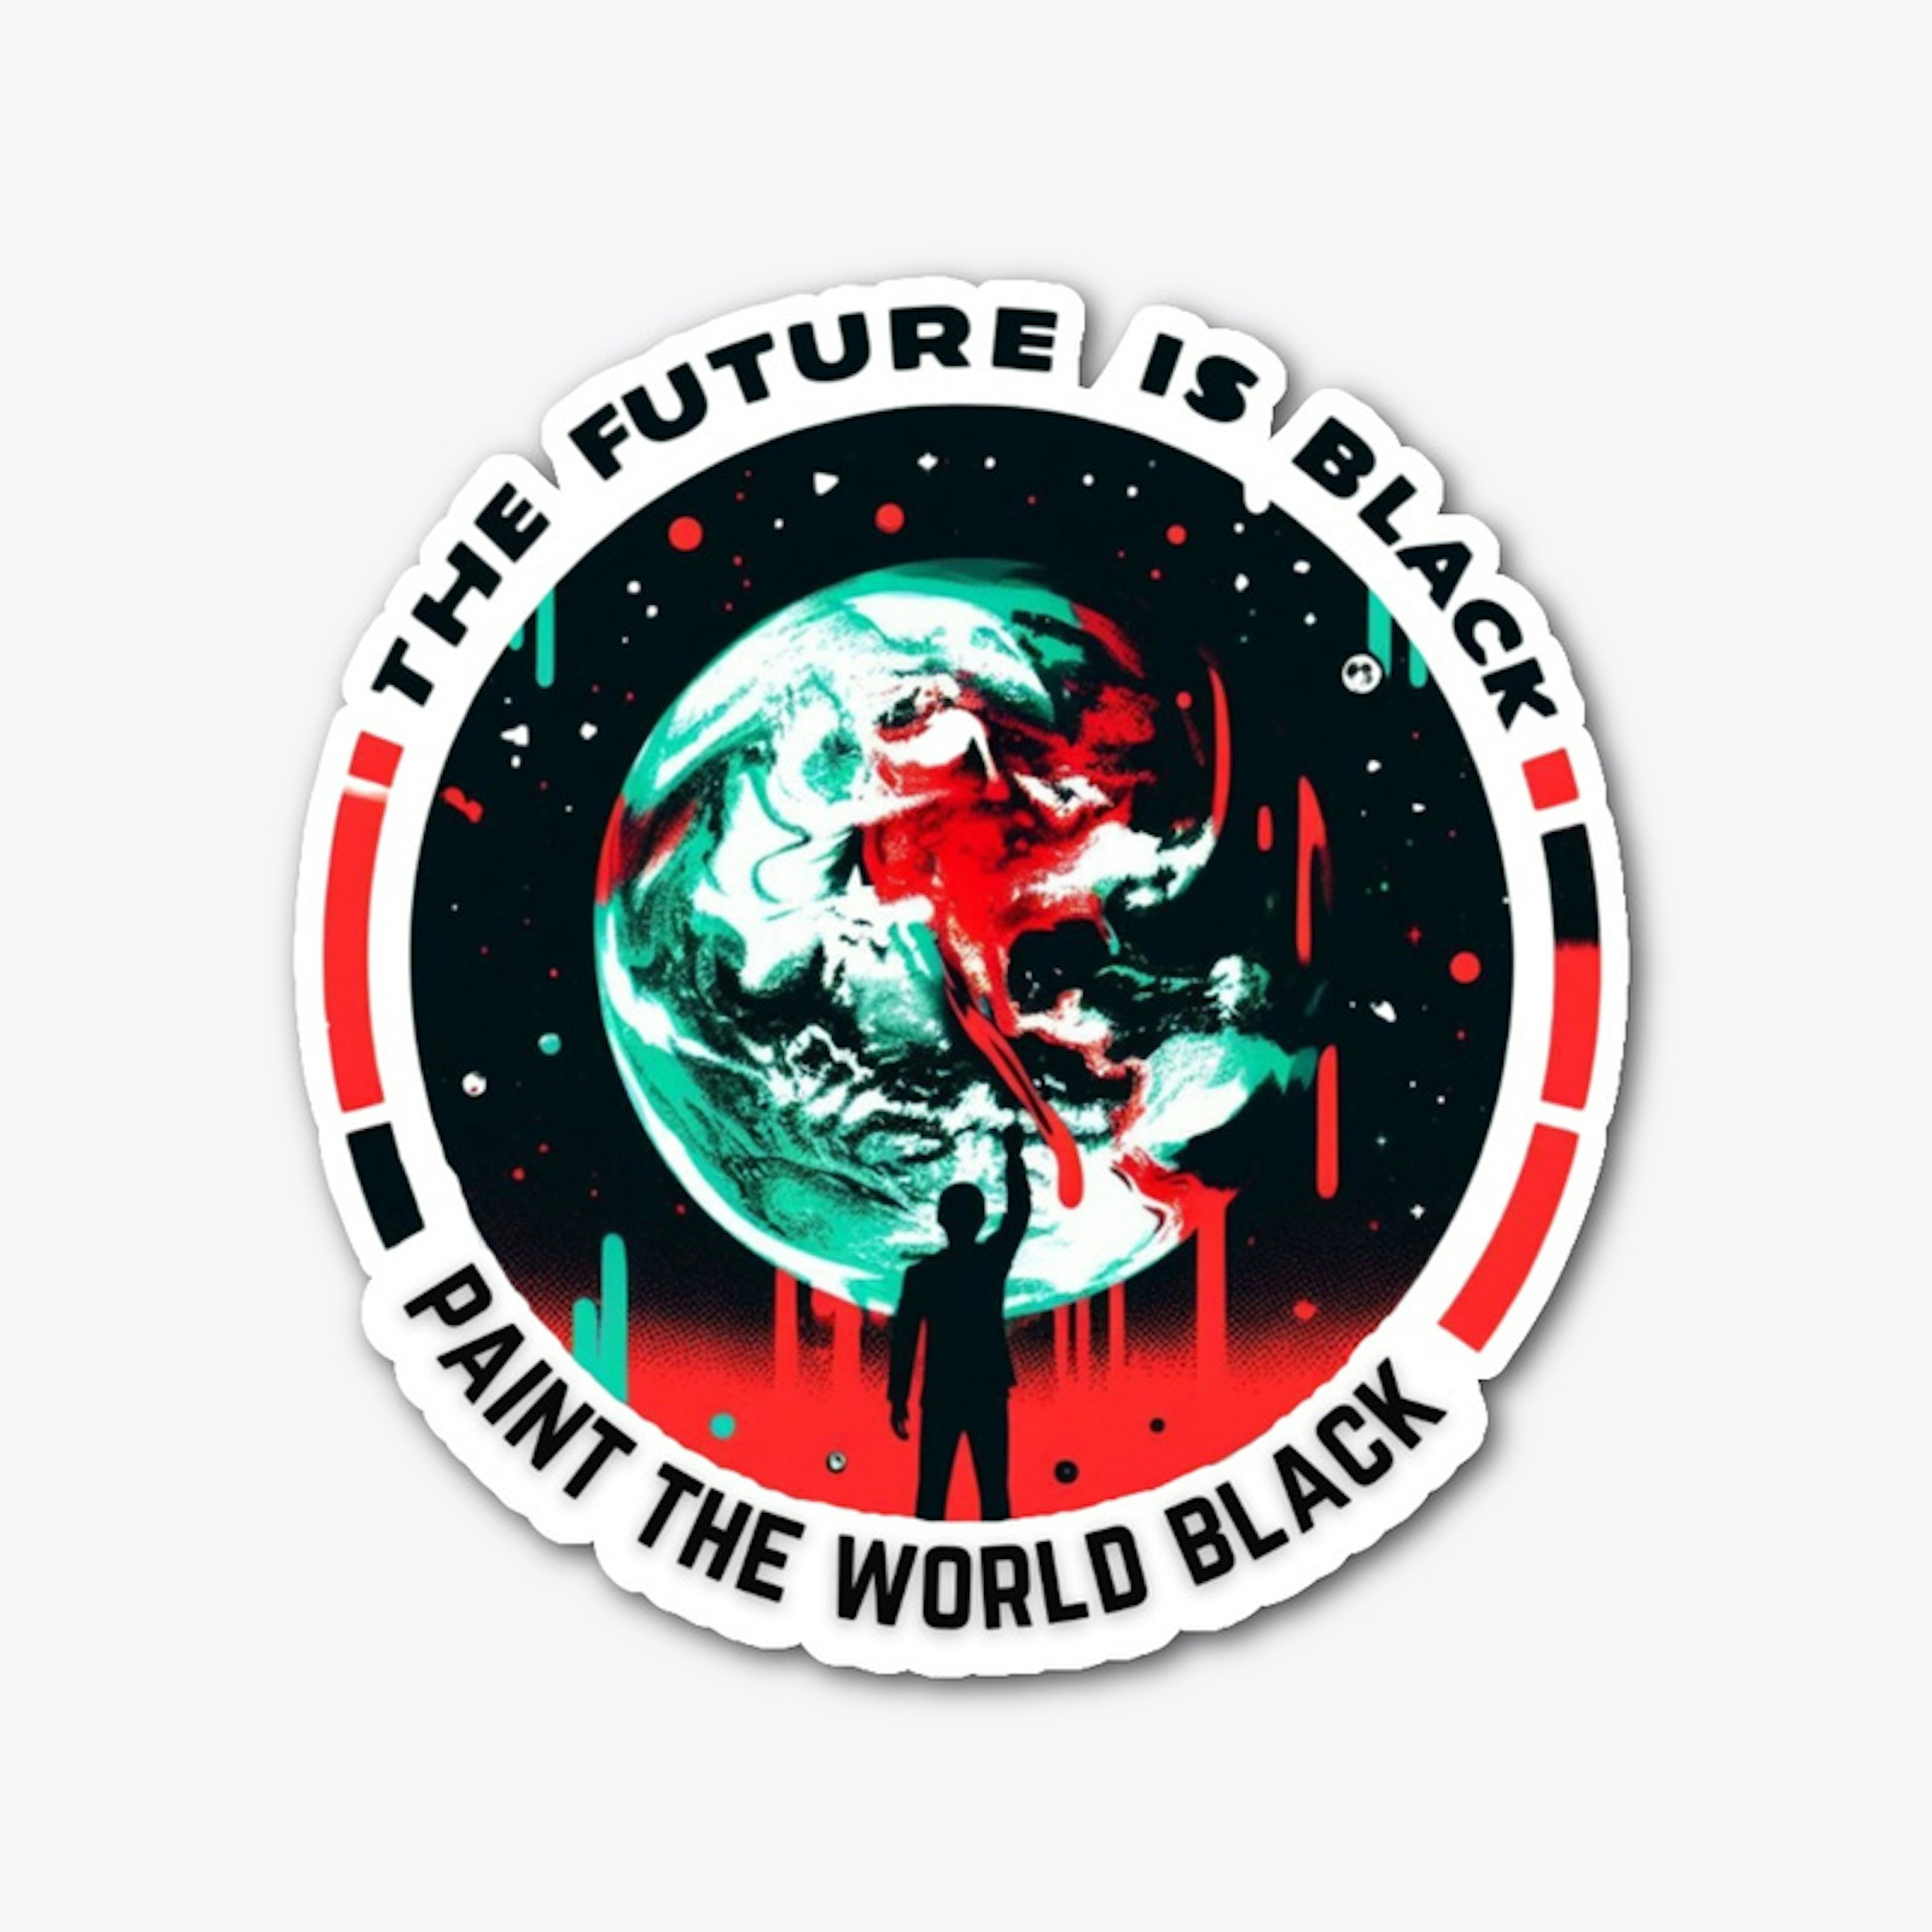 The Future is Black